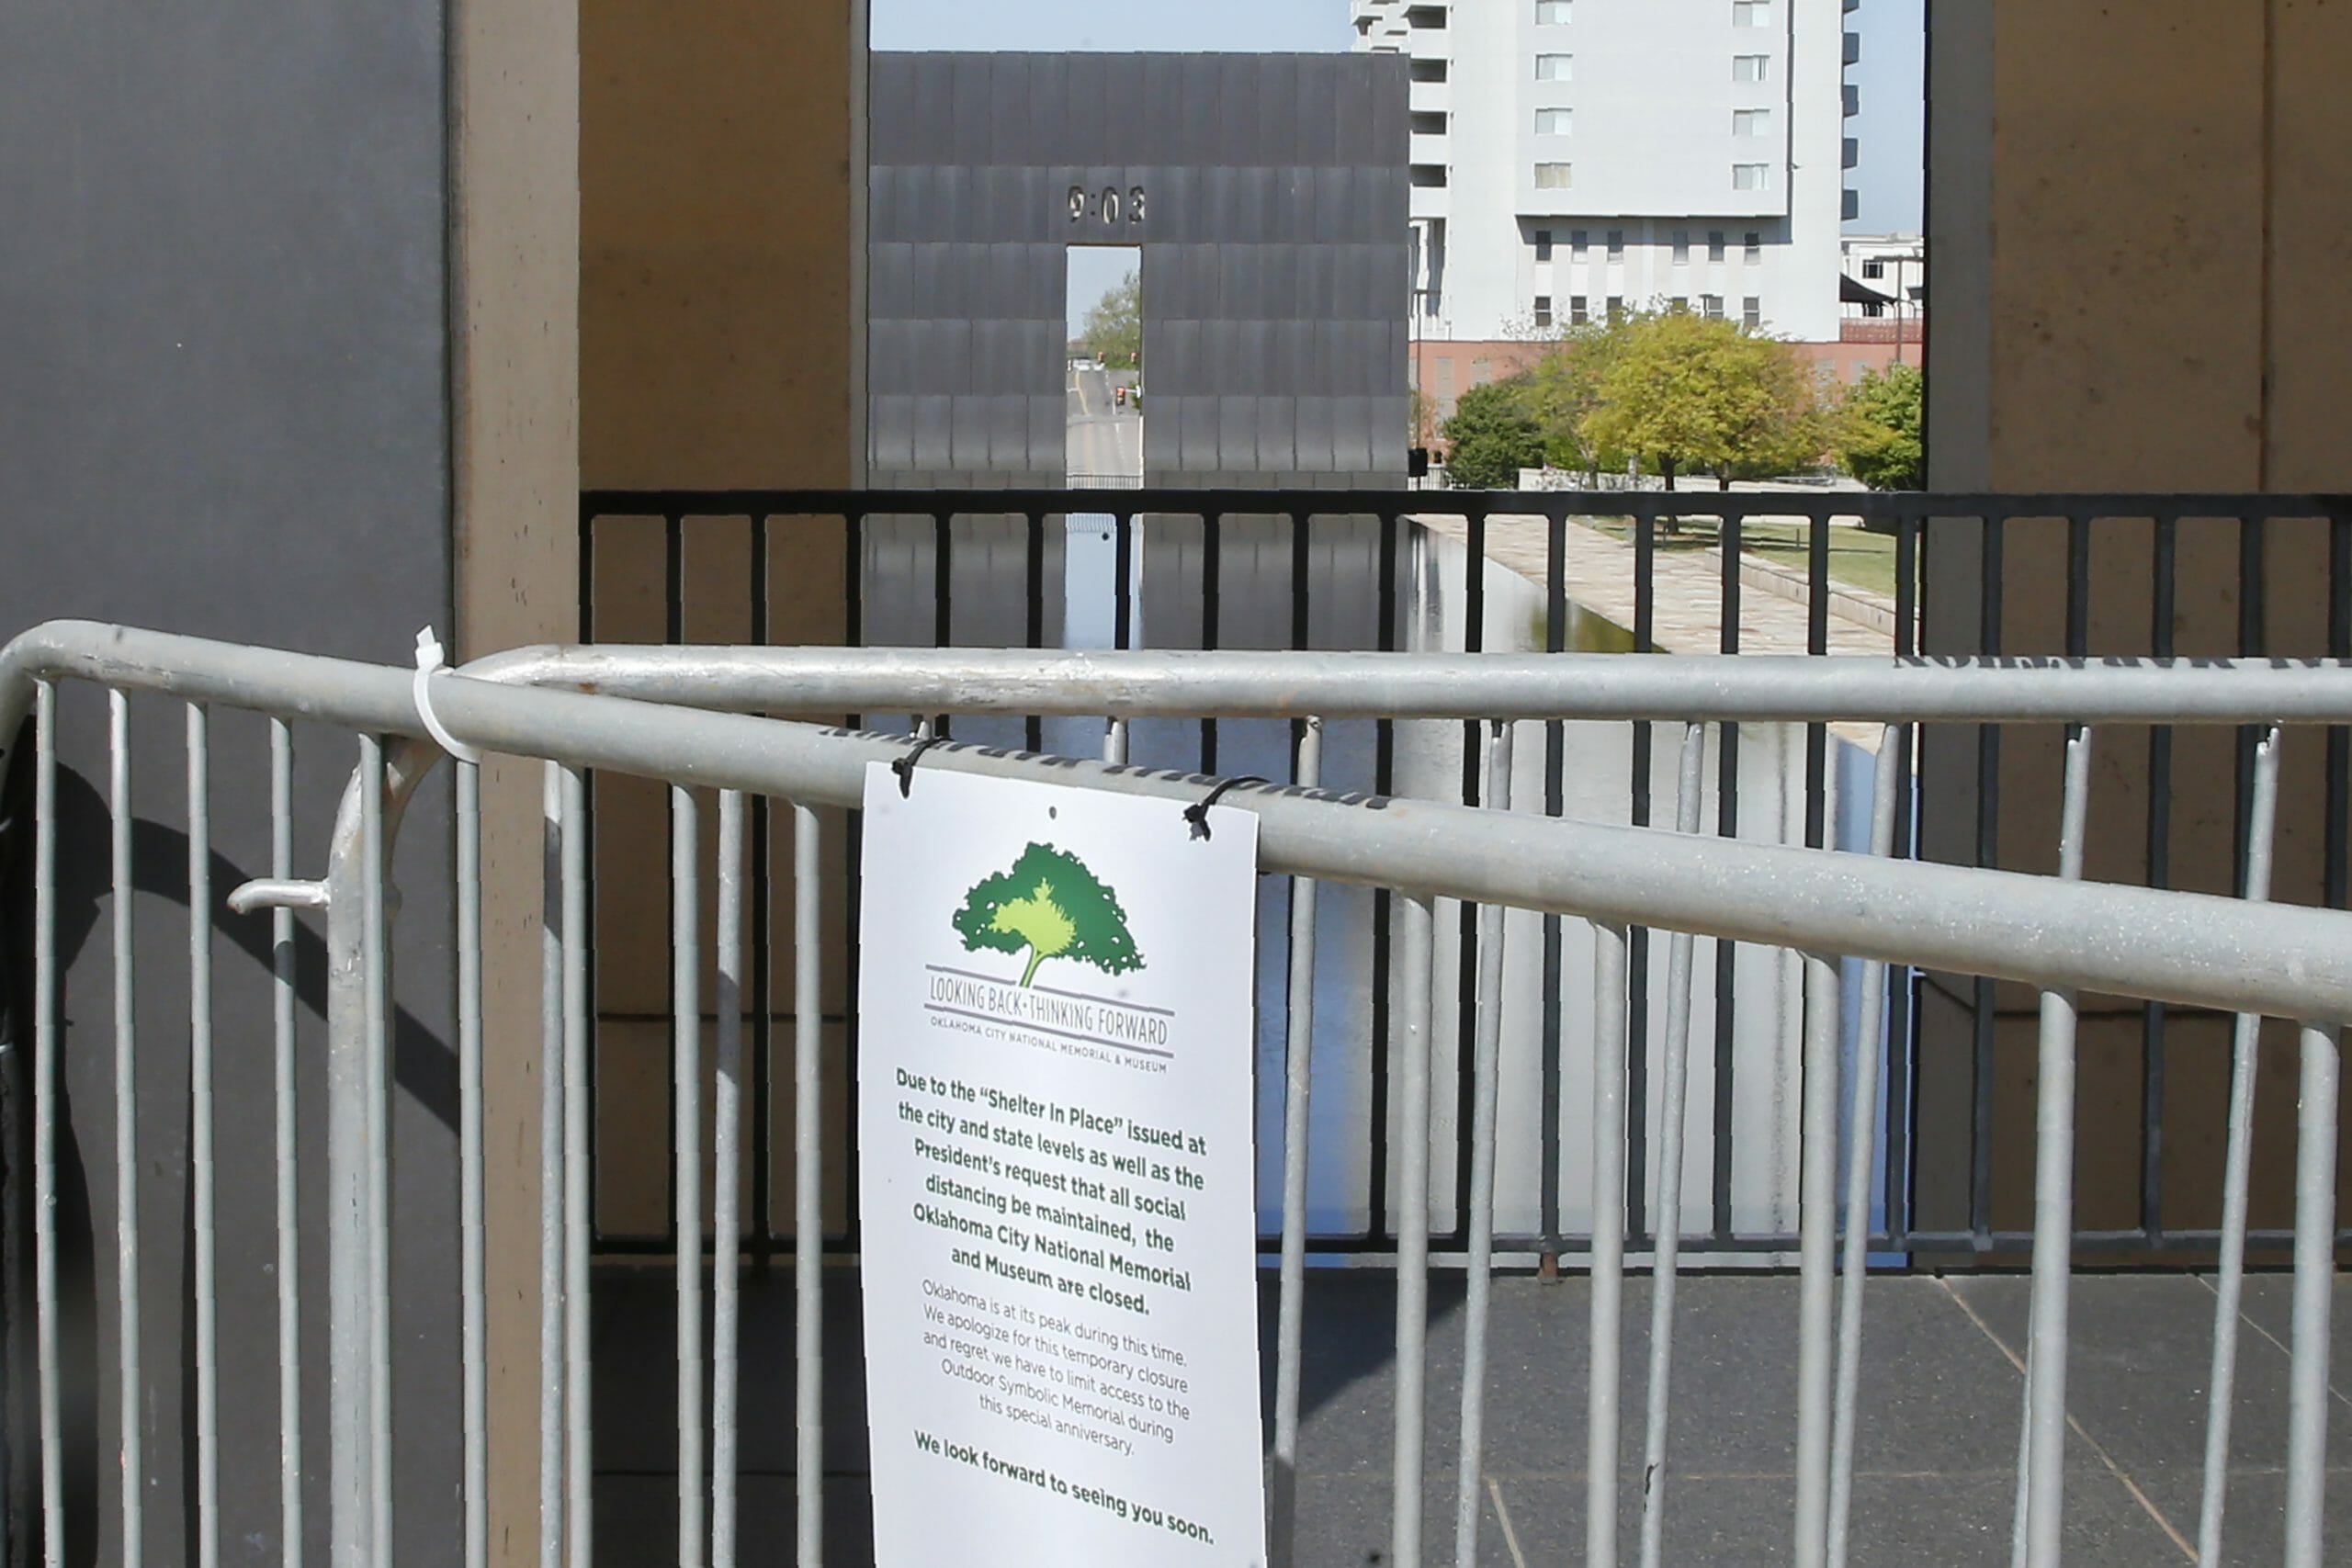 The 9:02 Gate at the Oklahoma City National Memorial and Museum is pictured behind a sign announcing the closure of the site, Wednesday in Oklahoma City.